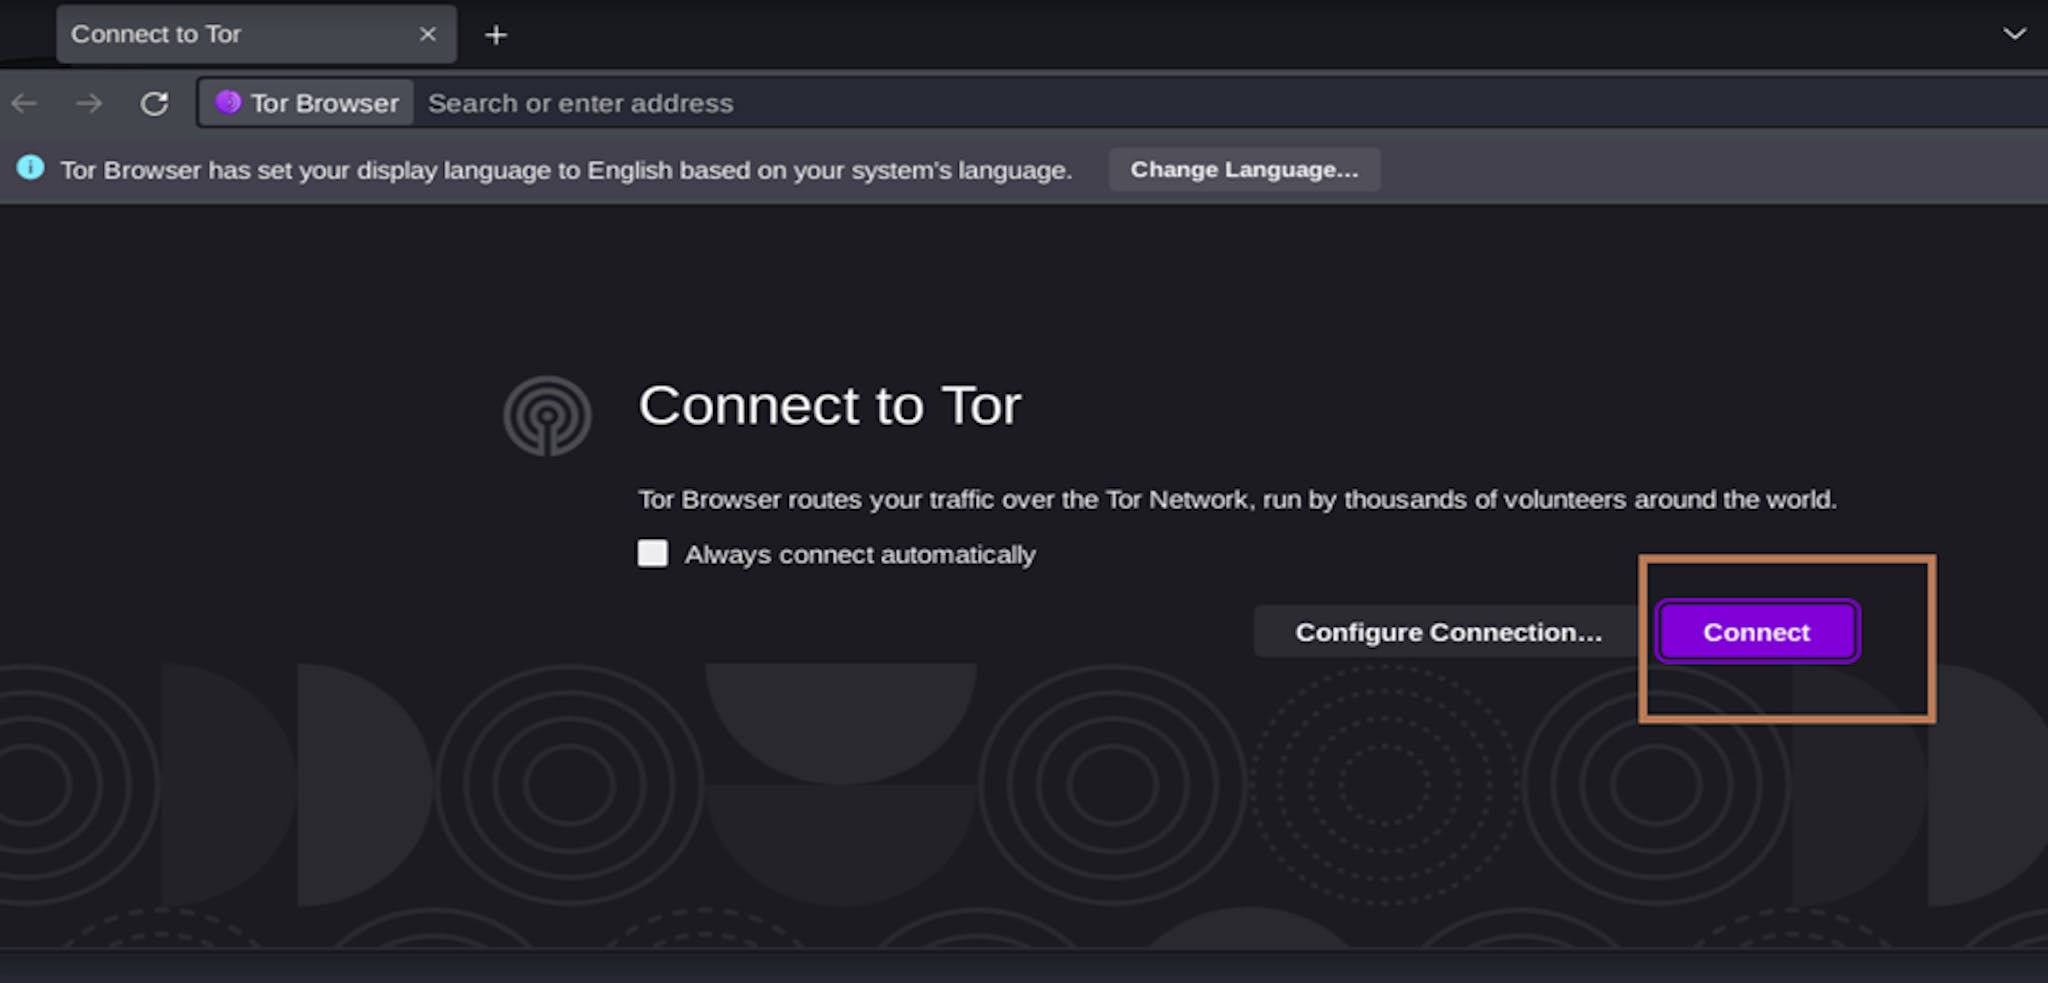 Connecting to Tor